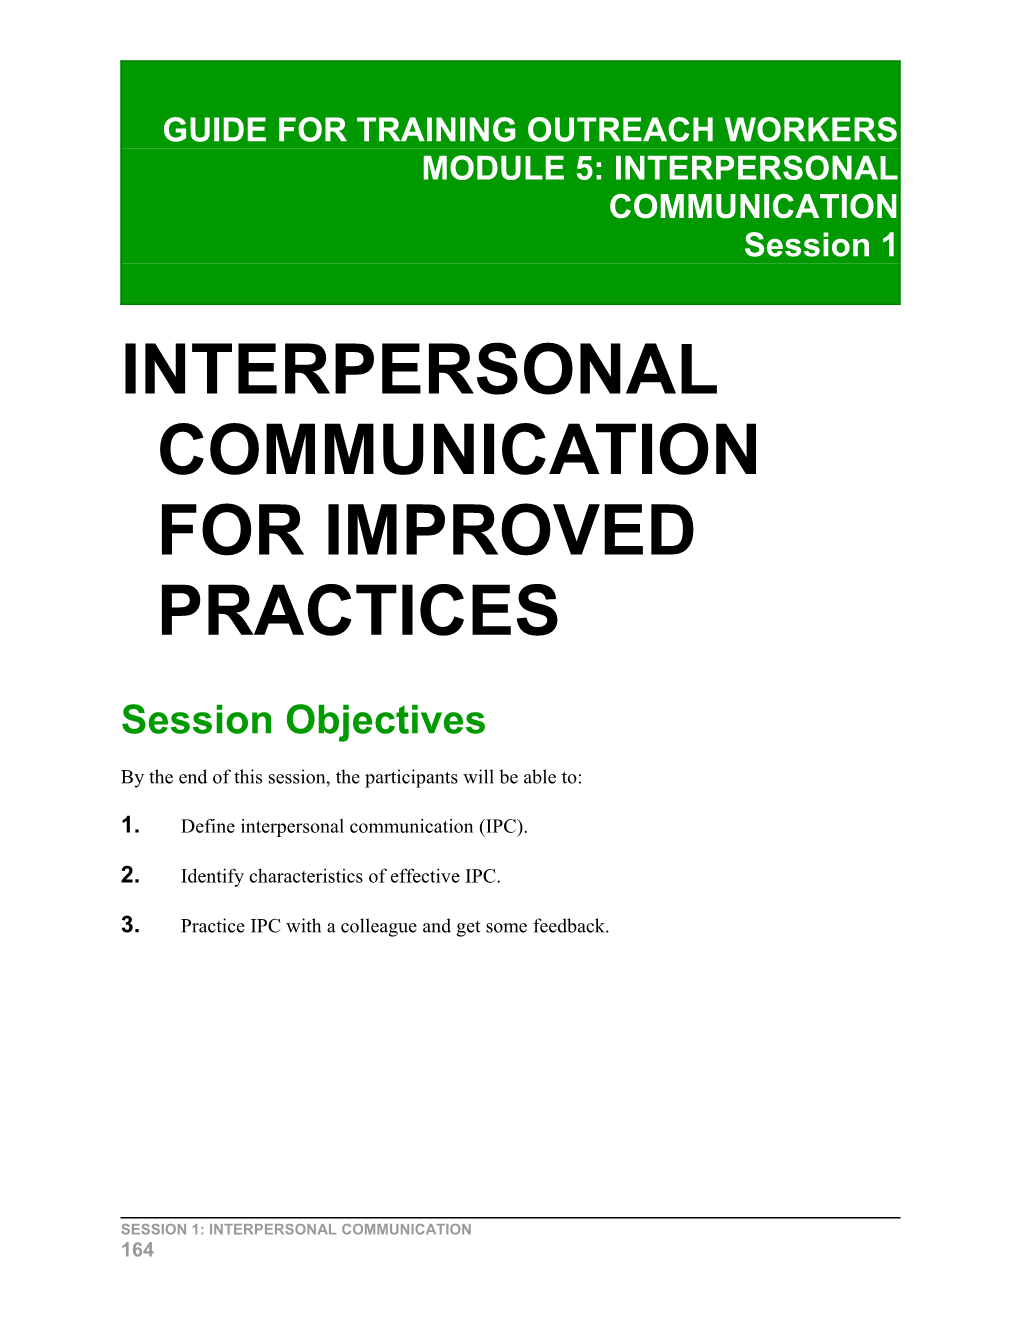 Interpersonal Communication for Improved Practices